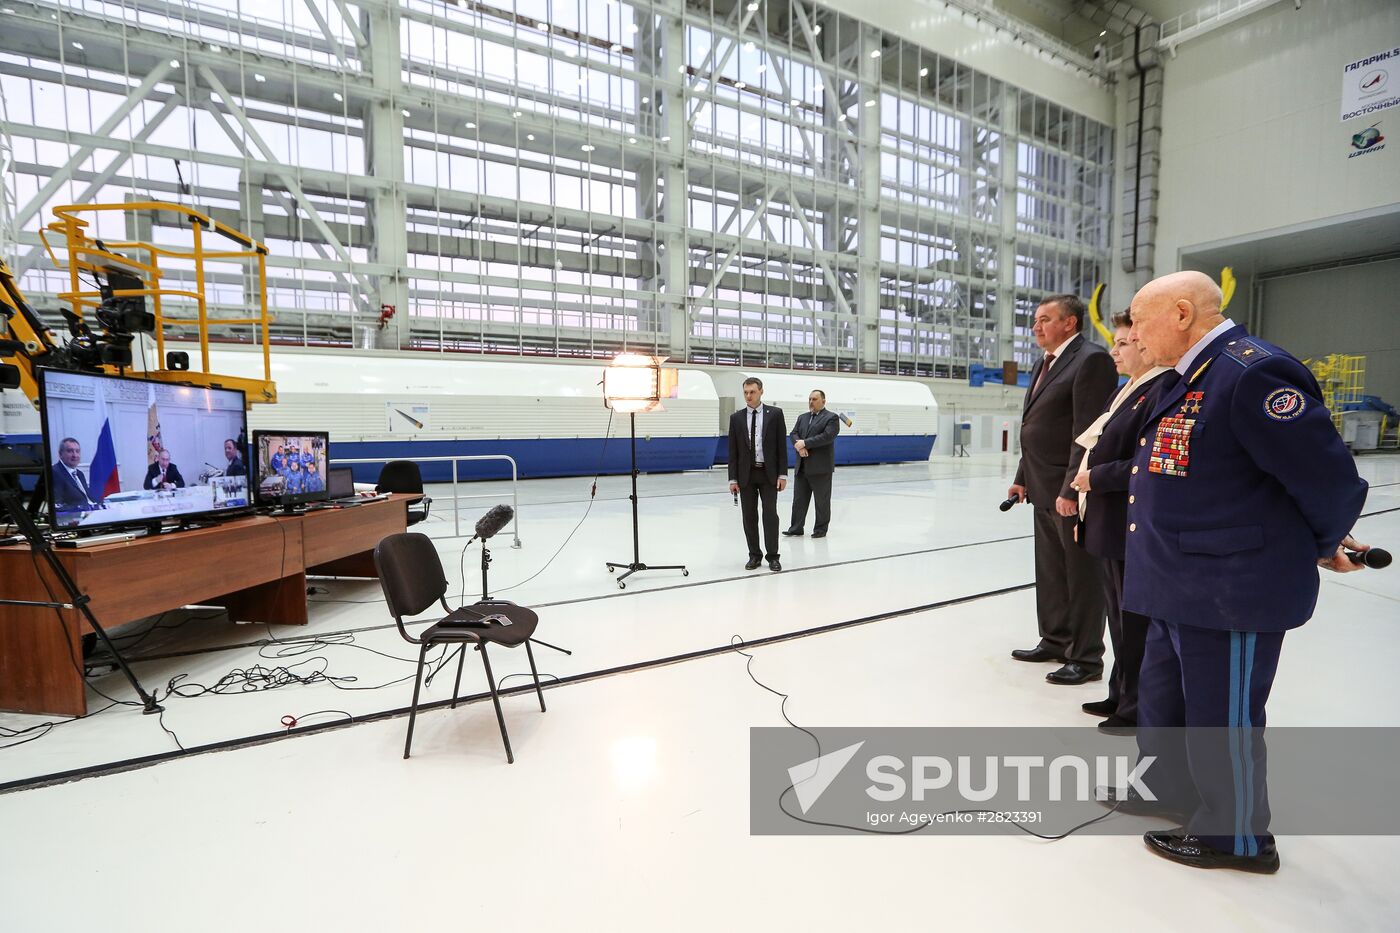 Aviation and Cosmonautics Day celebrated at Vostochny Space Center in Amur Region